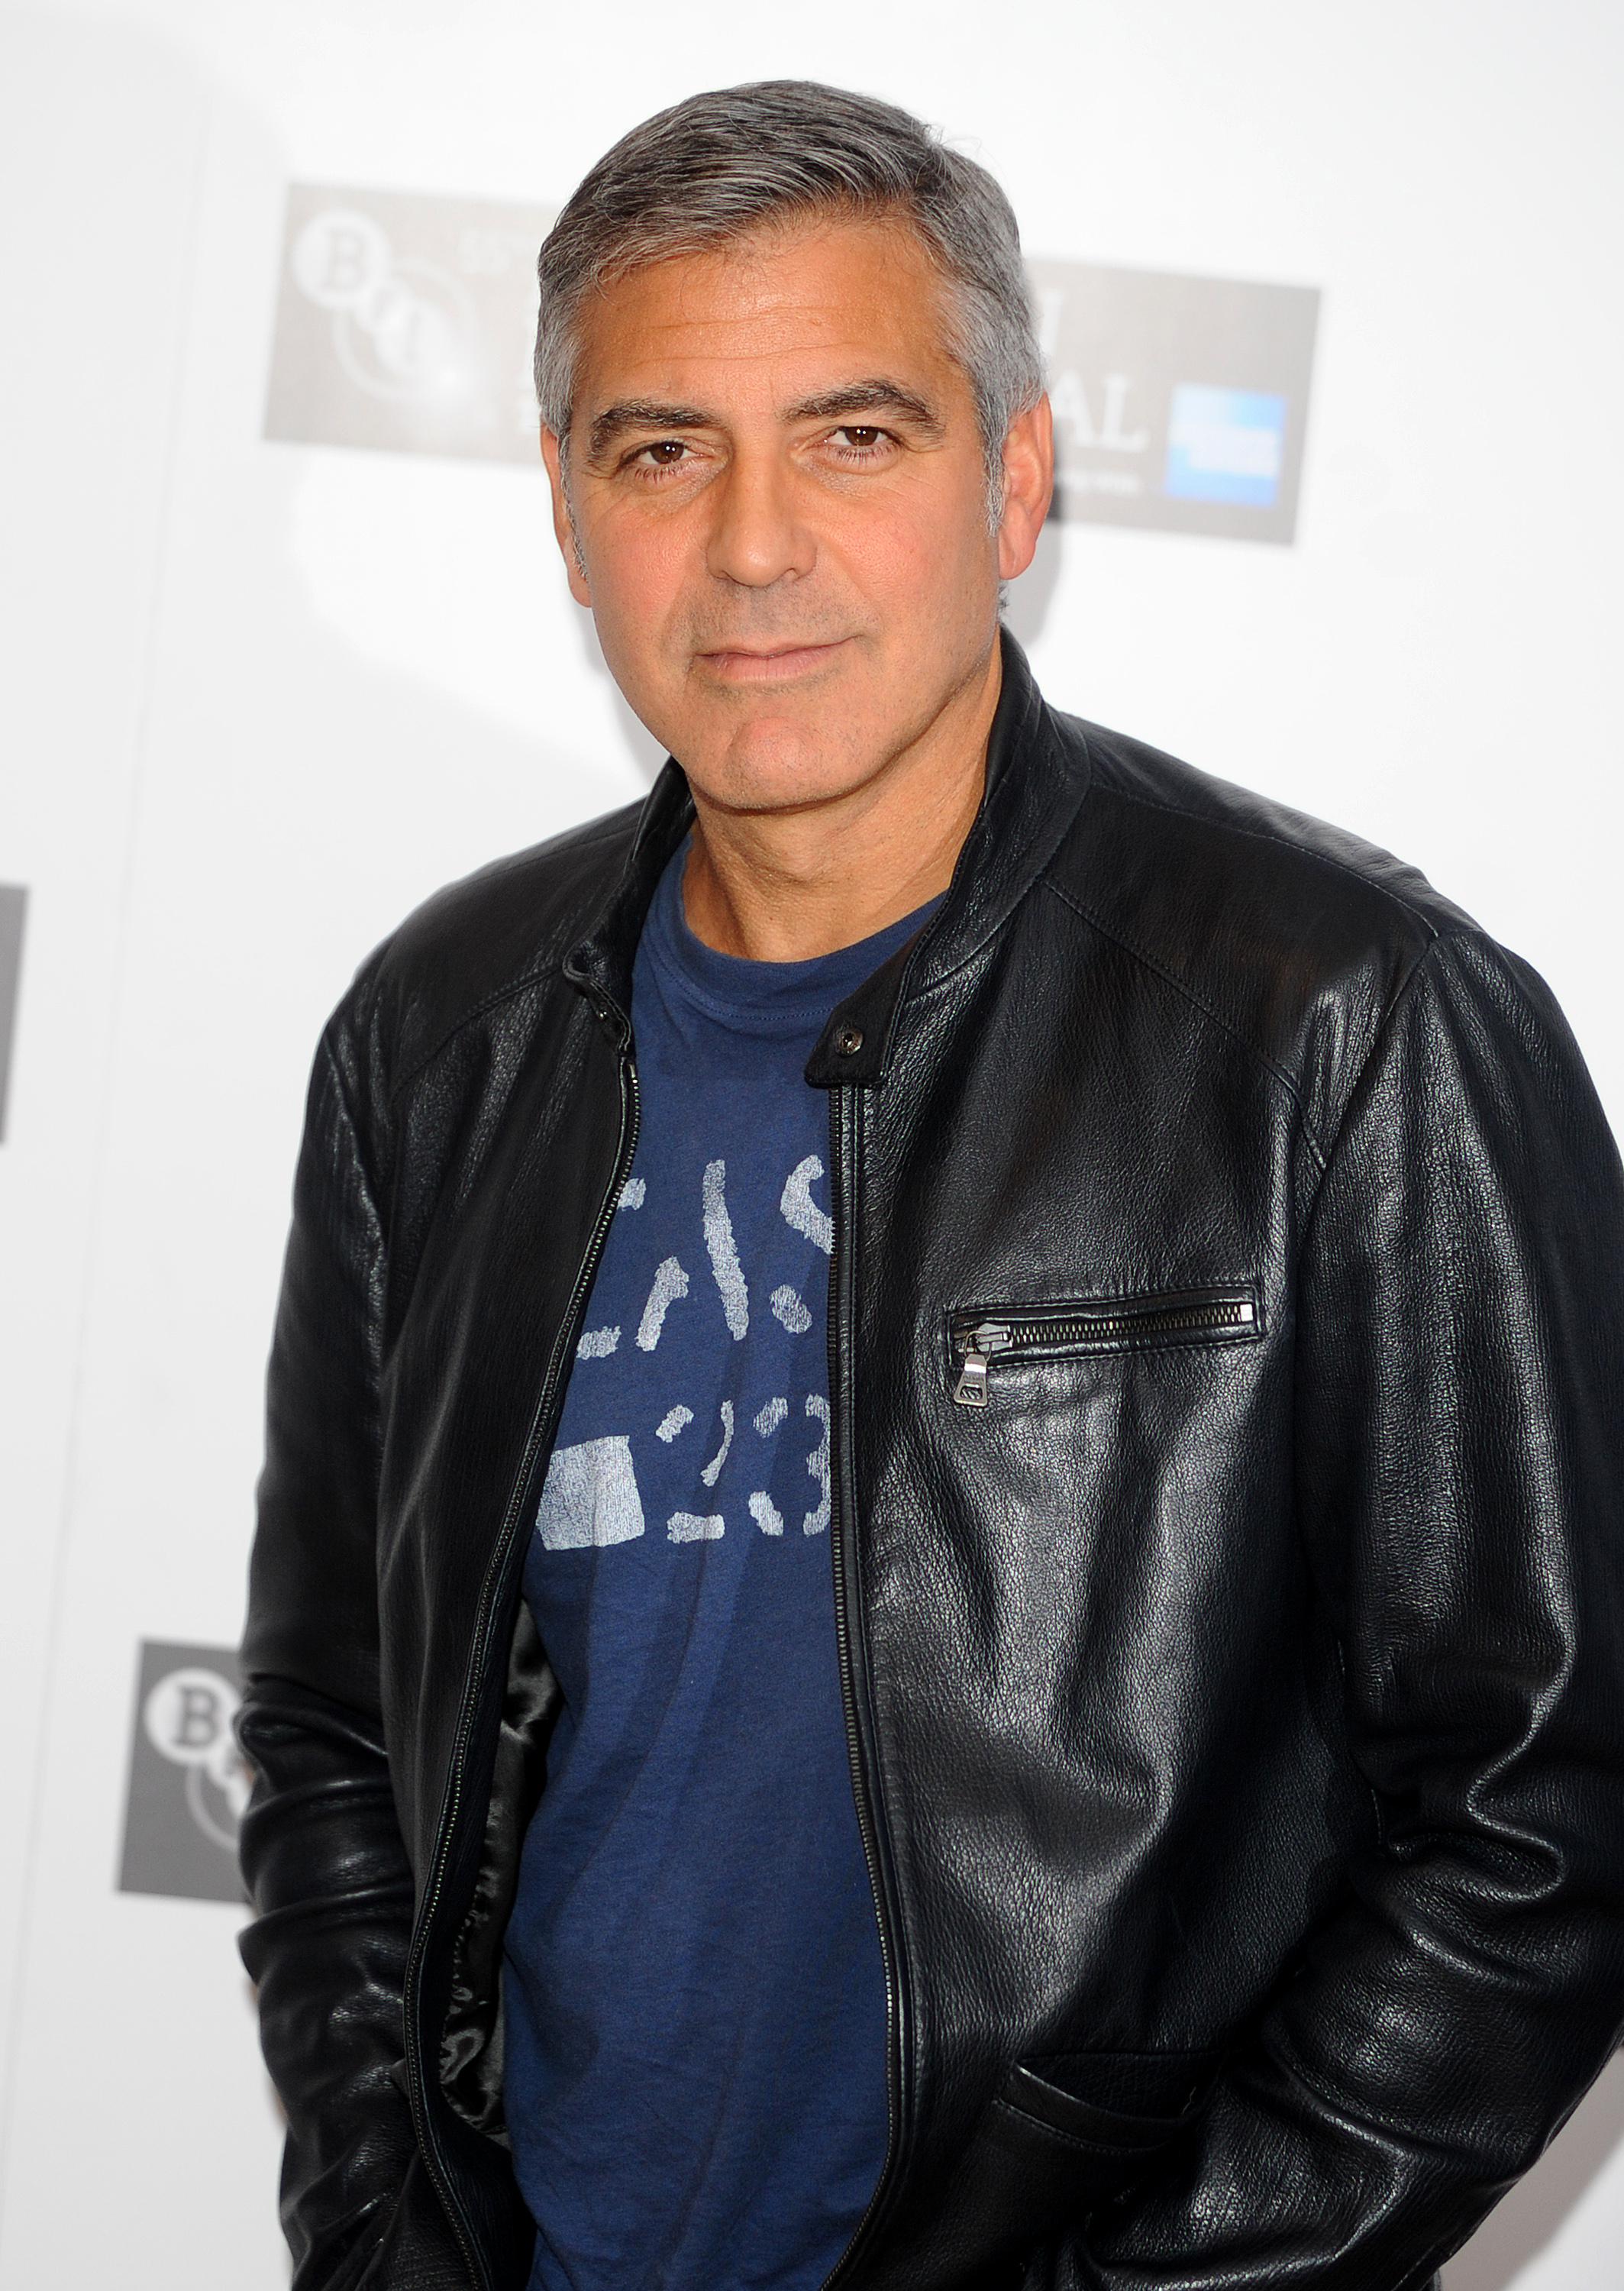 Man in a leather jacket over a graphic tee posing at an event